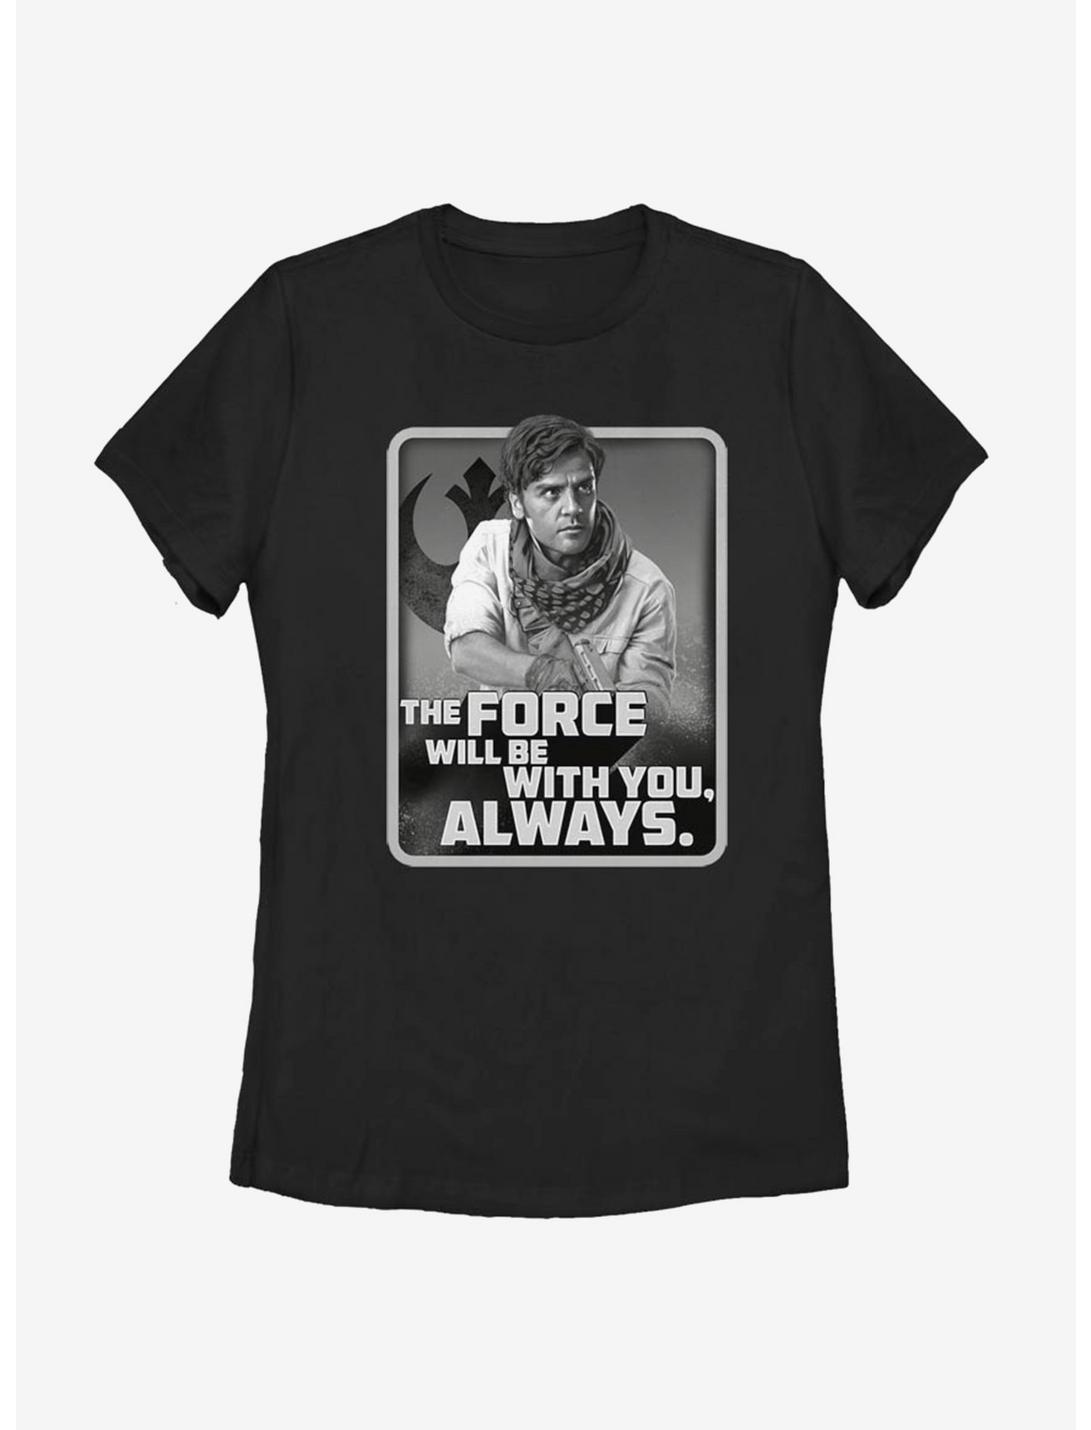 Star Wars Episode IX The Rise Of Skywalker With You Poe Womens T-Shirt, BLACK, hi-res